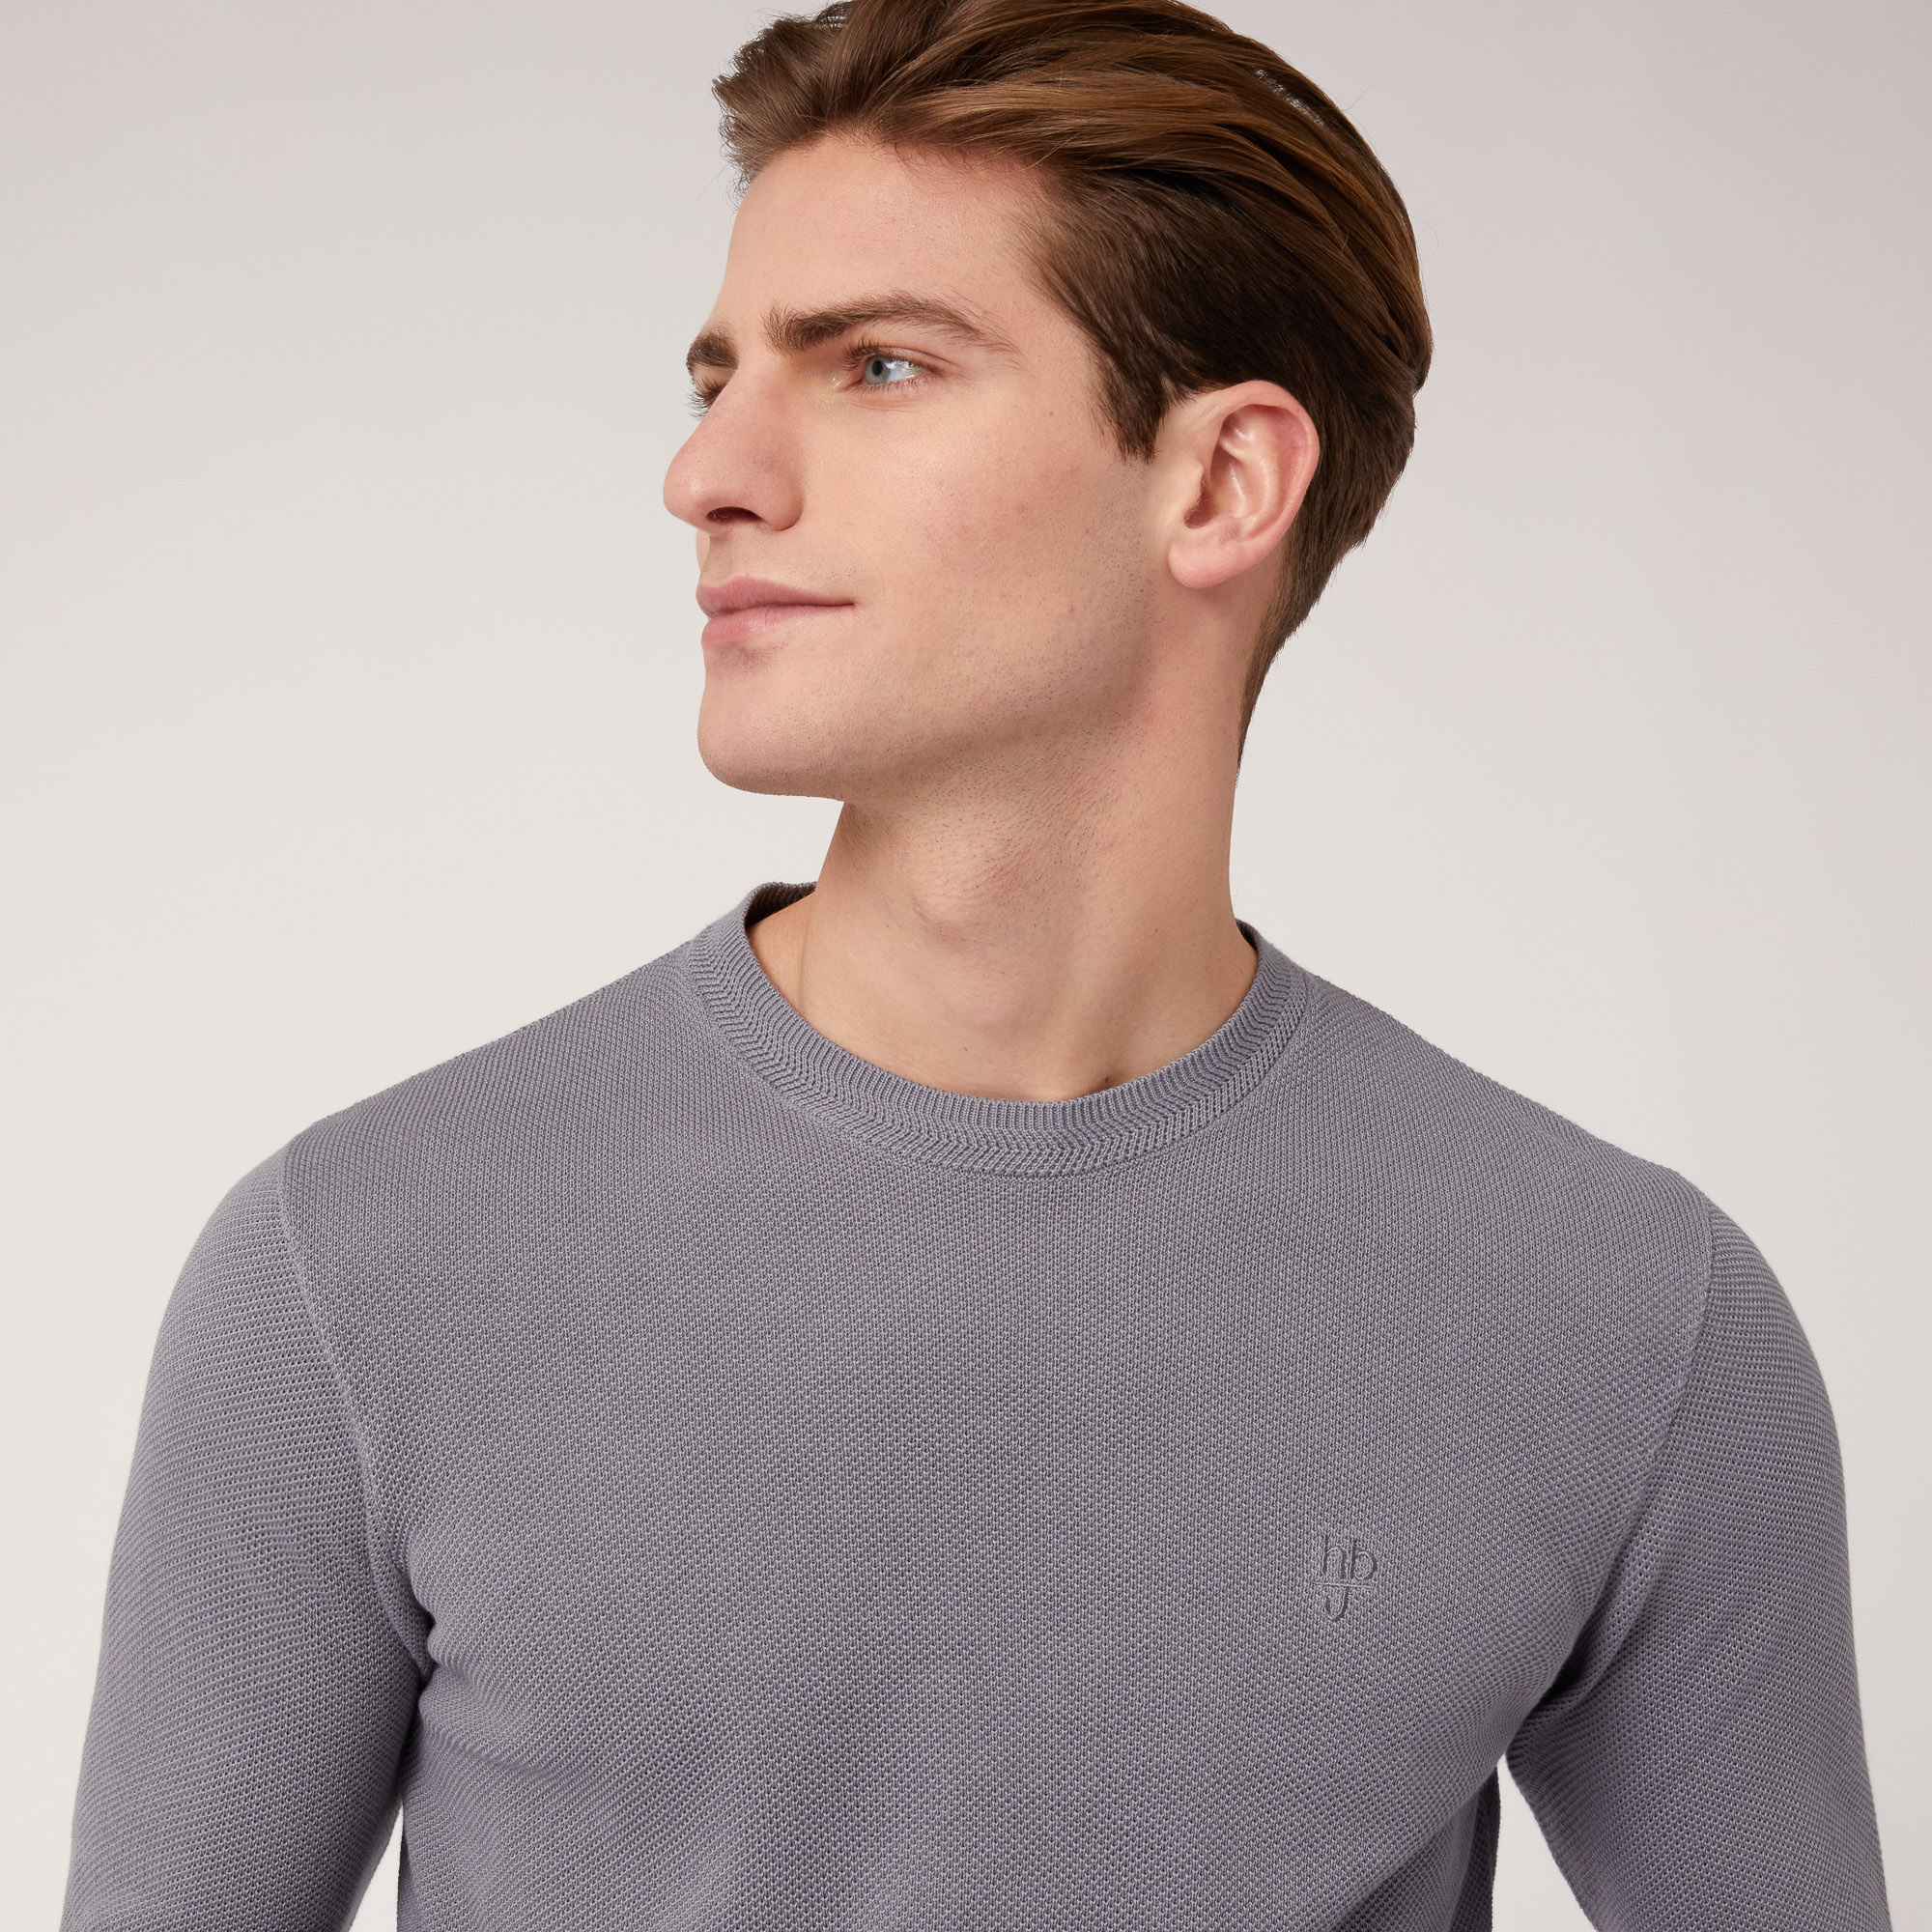 Pullover Girocollo Texture 3D, Grigio, large image number 2